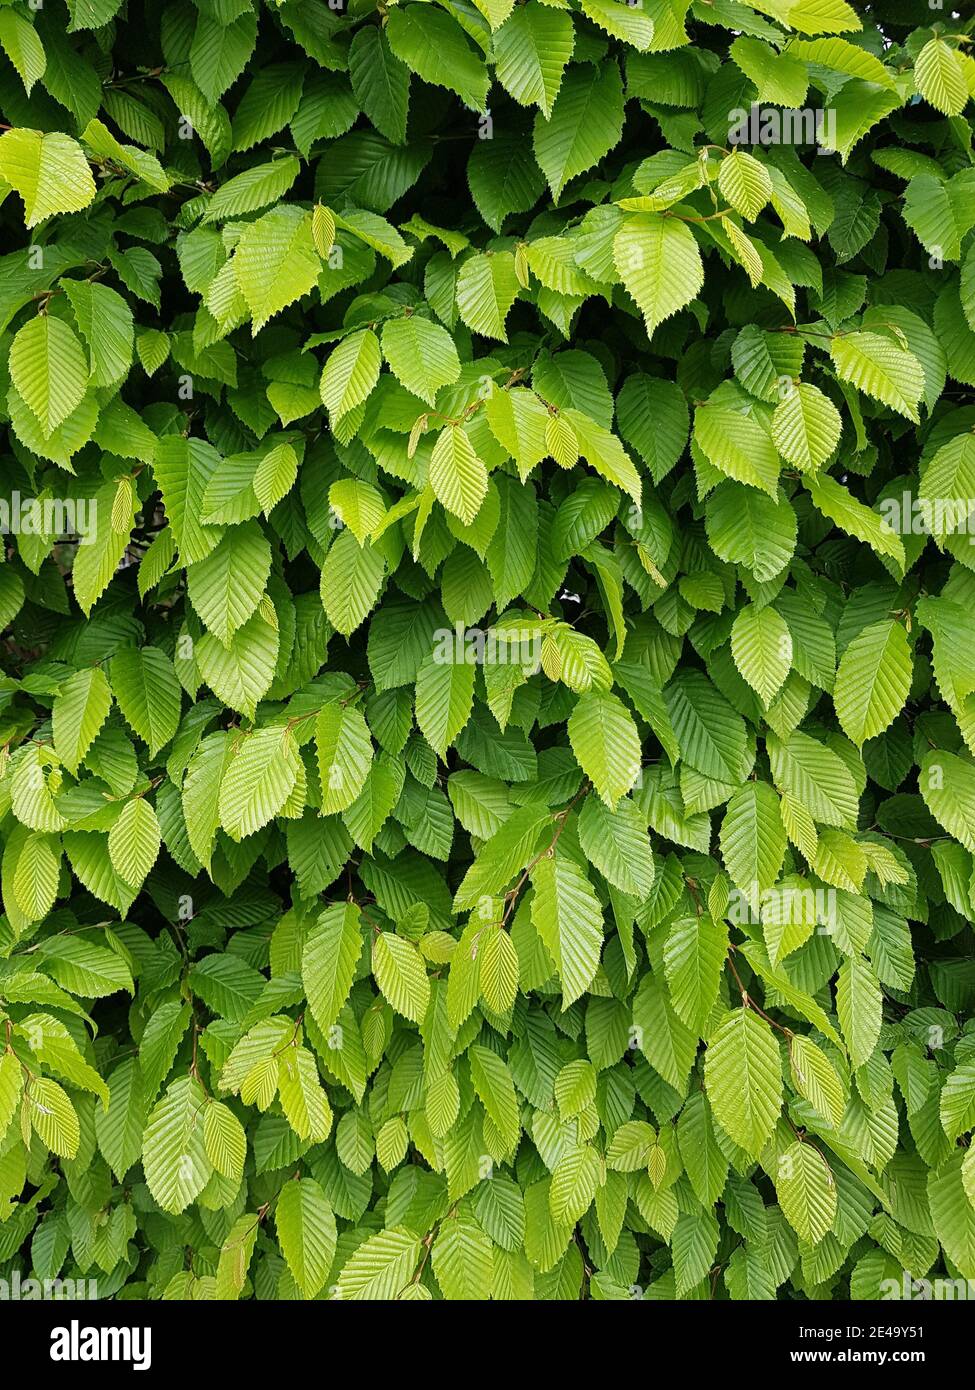 Section of a hornbeam hedge Stock Photo